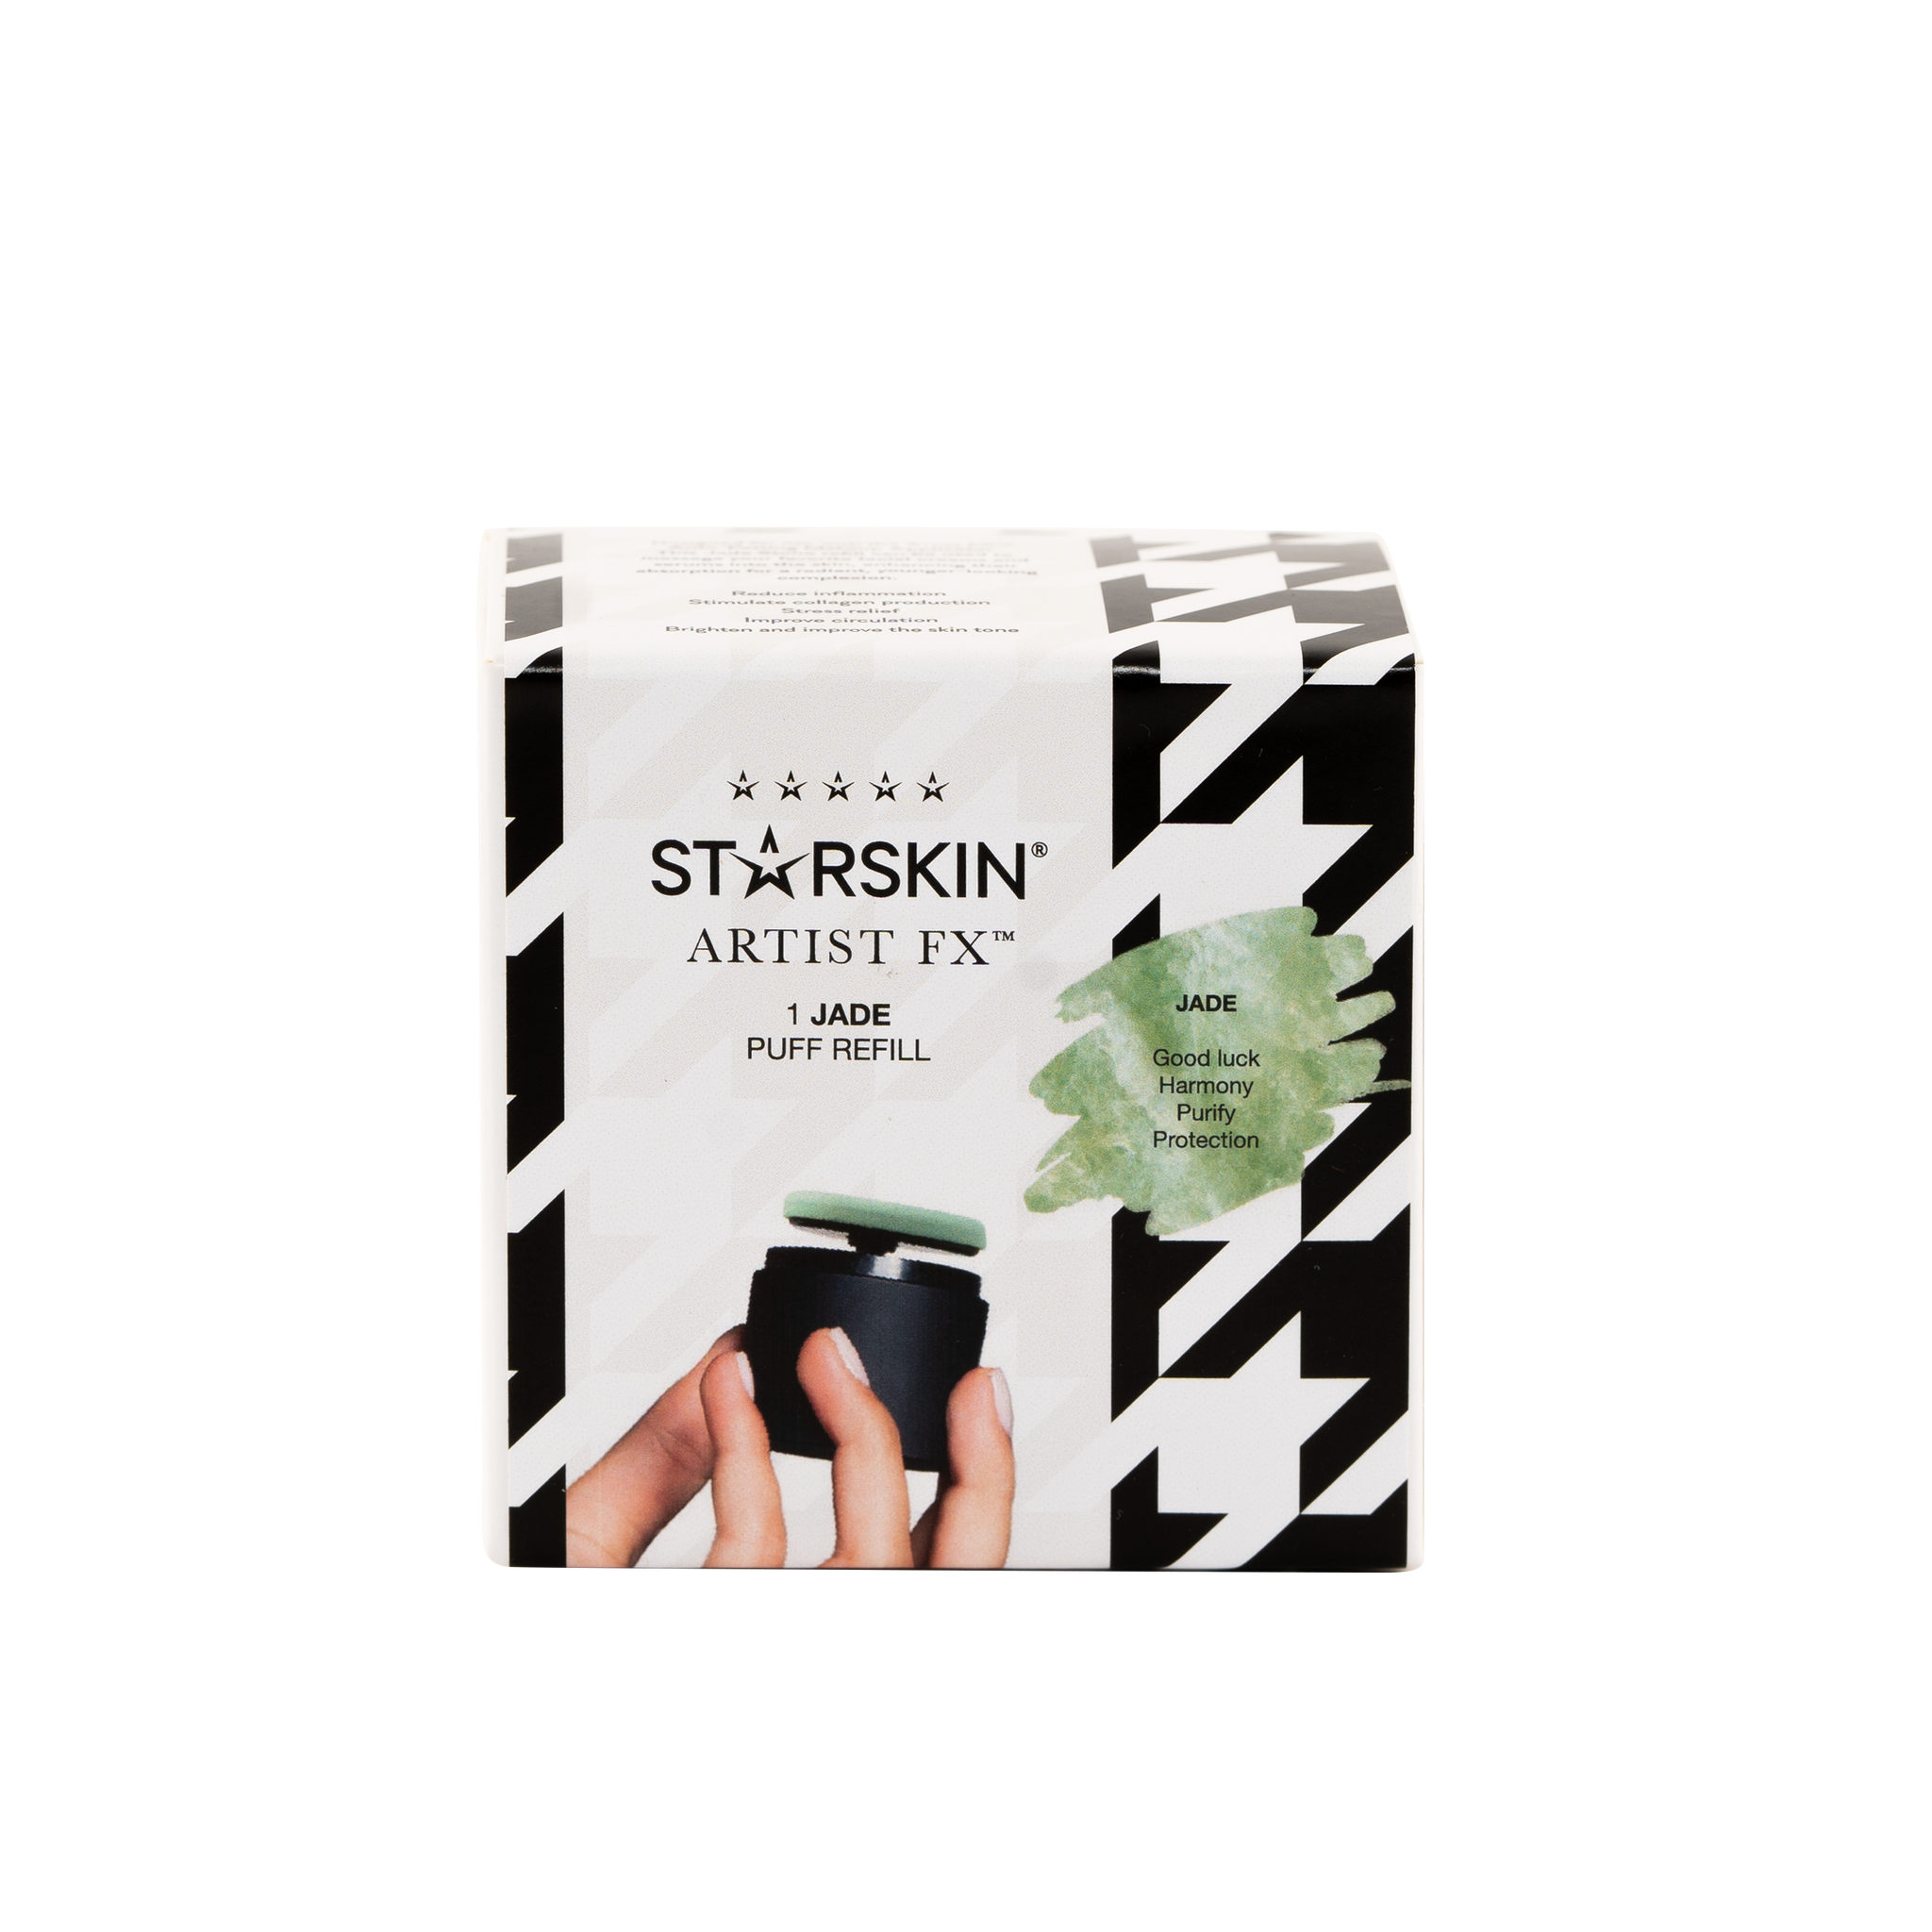 SkinIron Artist FX Jade stone From Starskin product picture box front